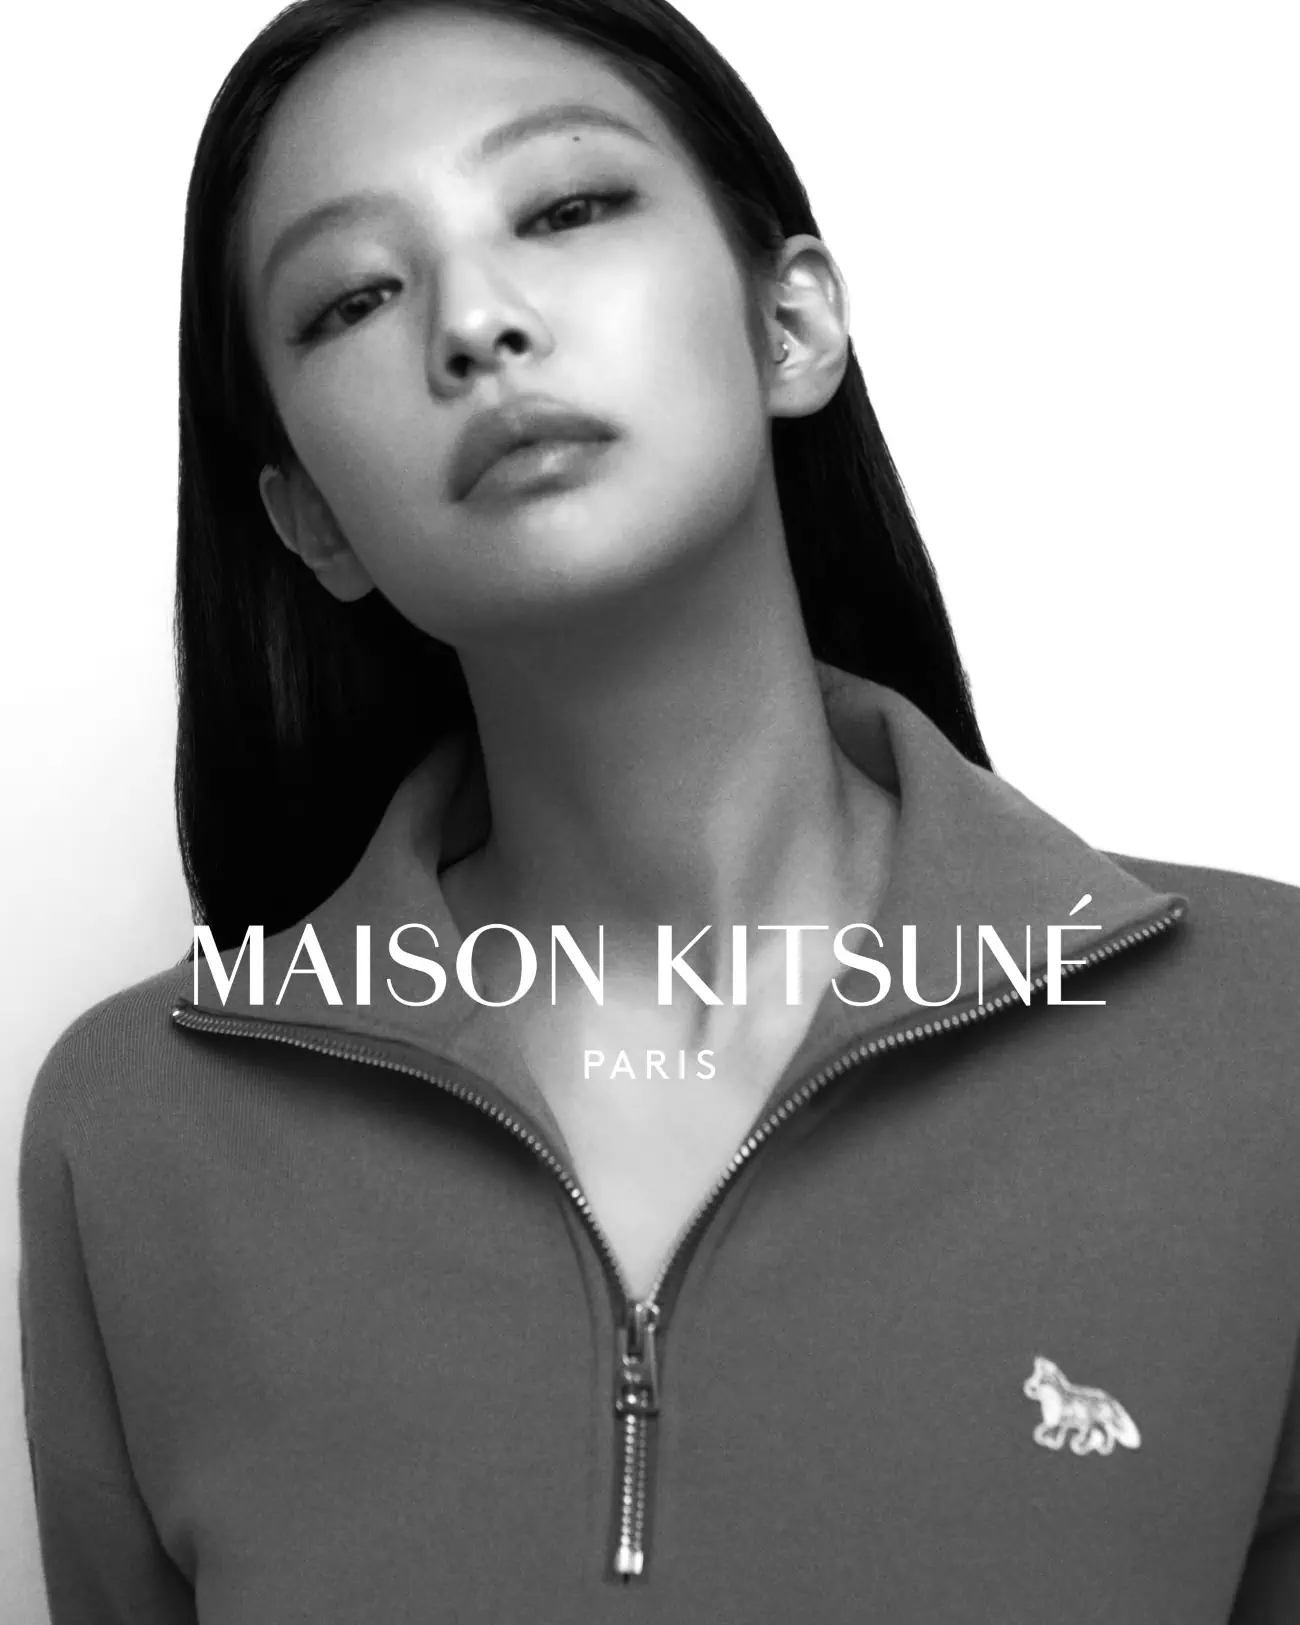 Maison Kitsuné taps Blackpink's Jennie for the campaign of the ''Baby Fox'' collection